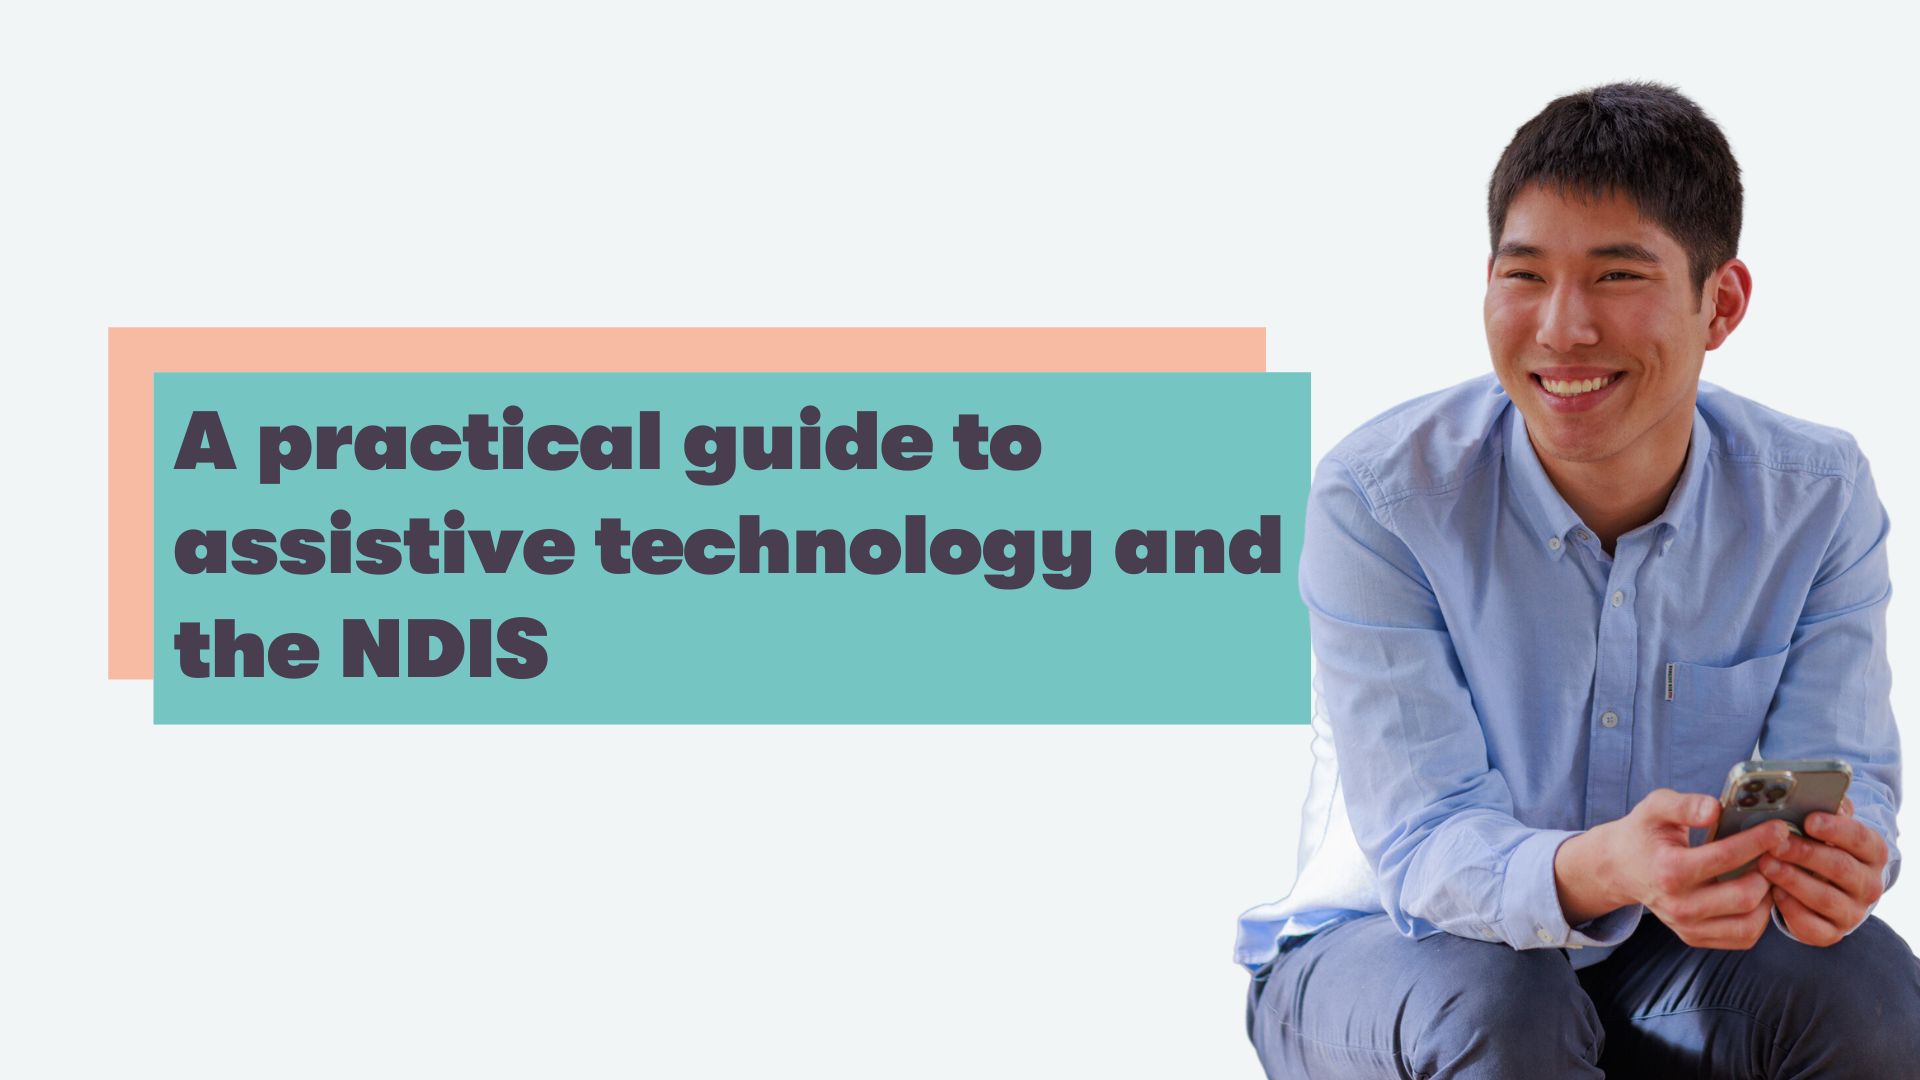 A guide to assistive technology and the NDIS